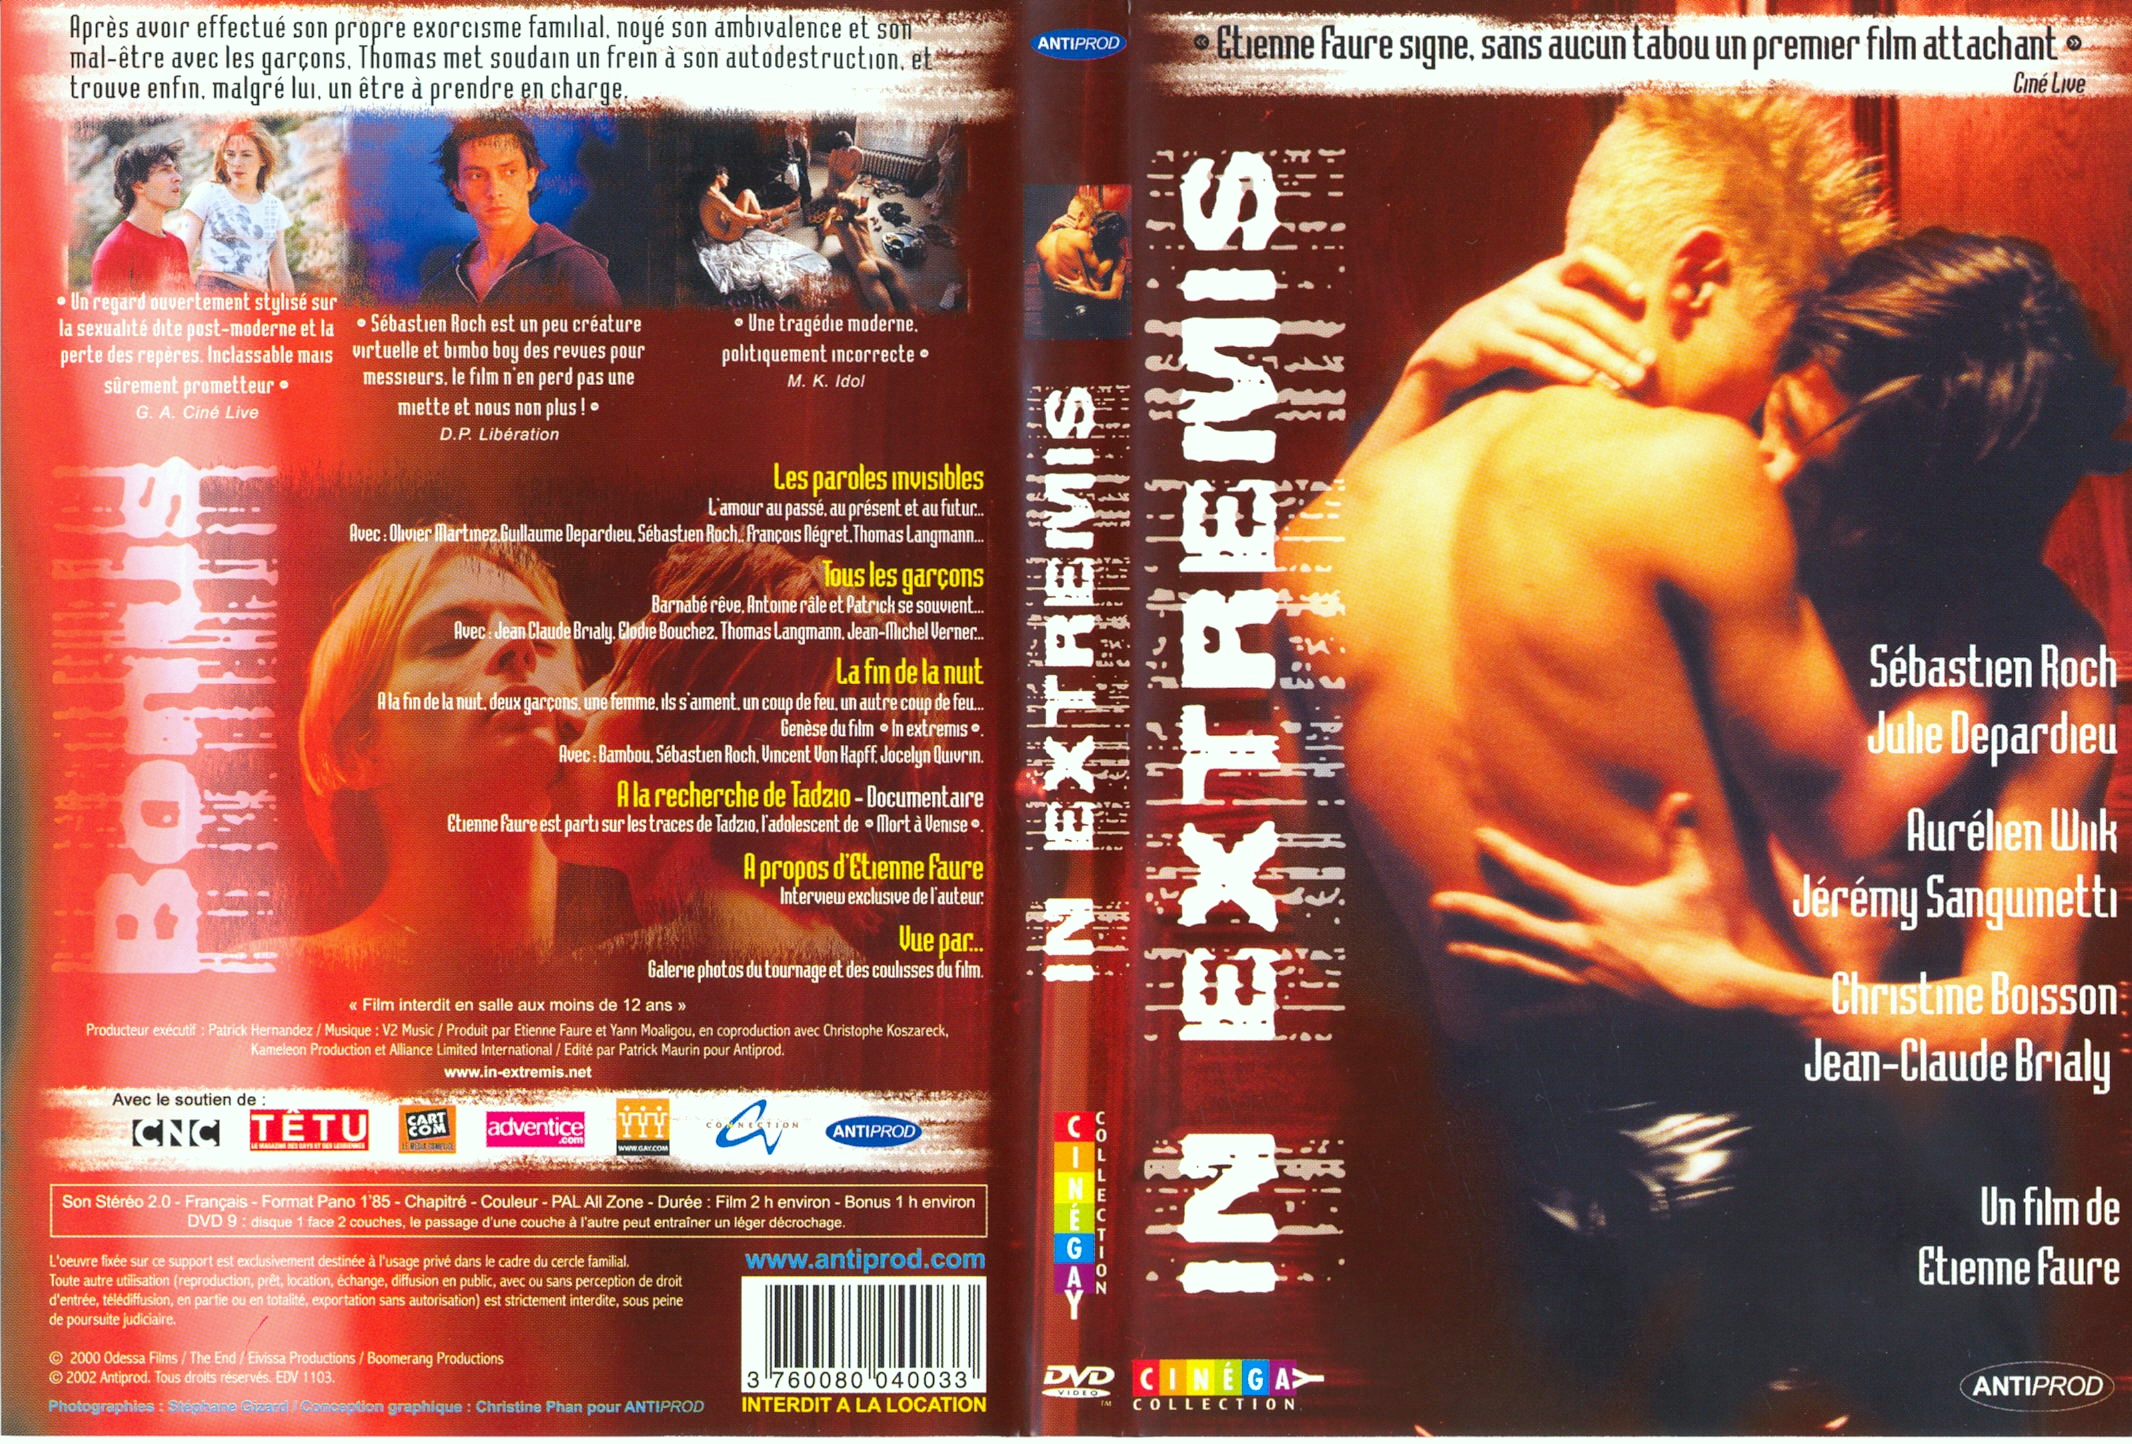 Jaquette DVD In extremis